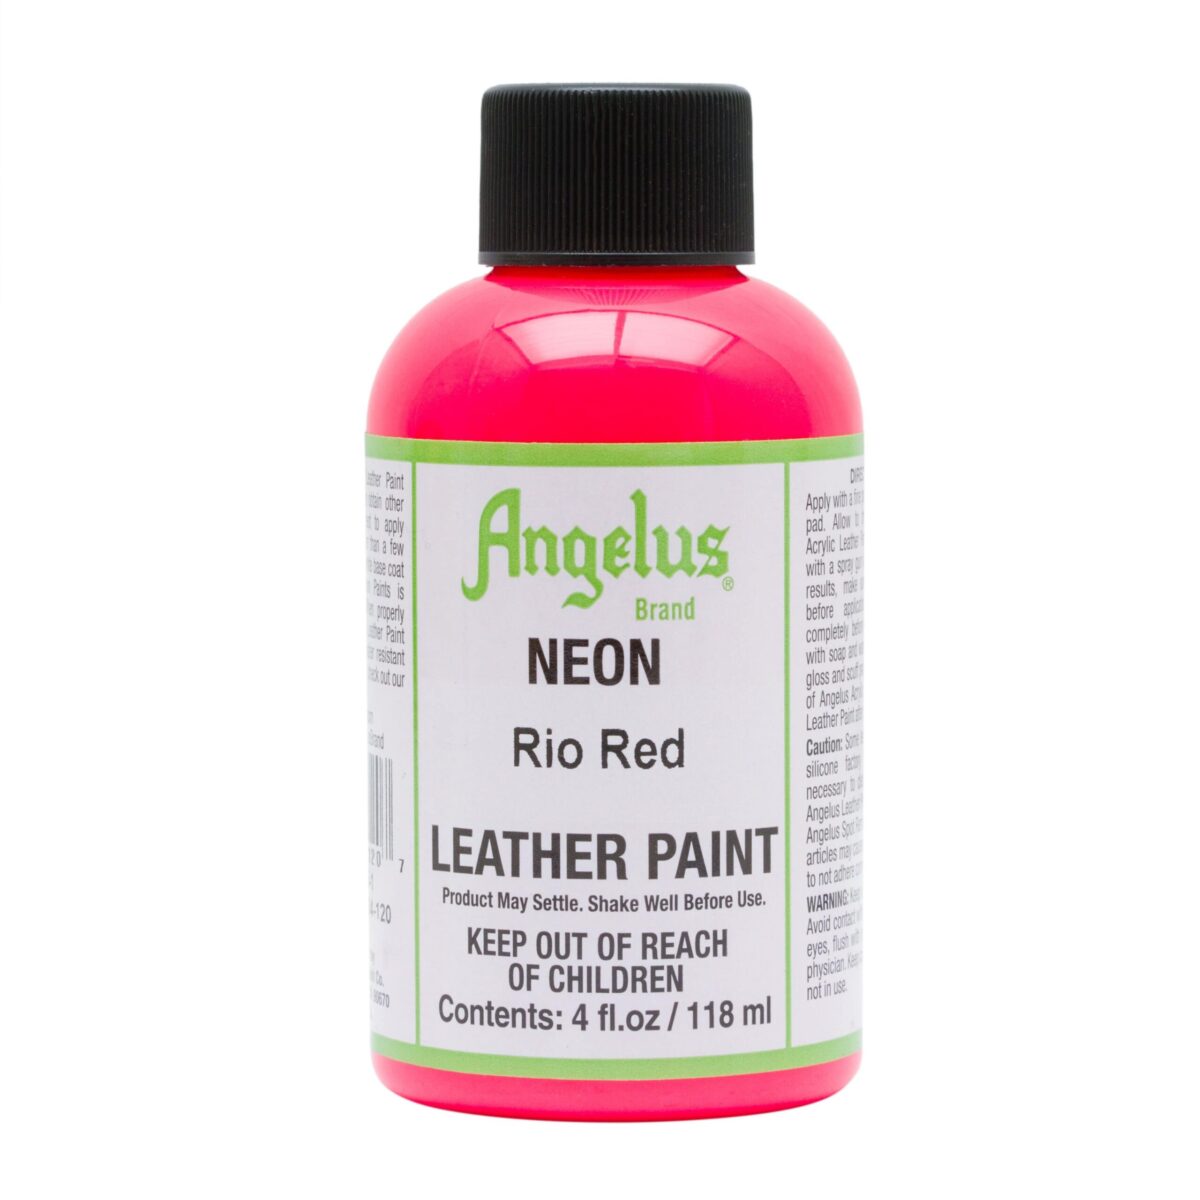 Angelus Leather Paint Neon Rio Red 118ml